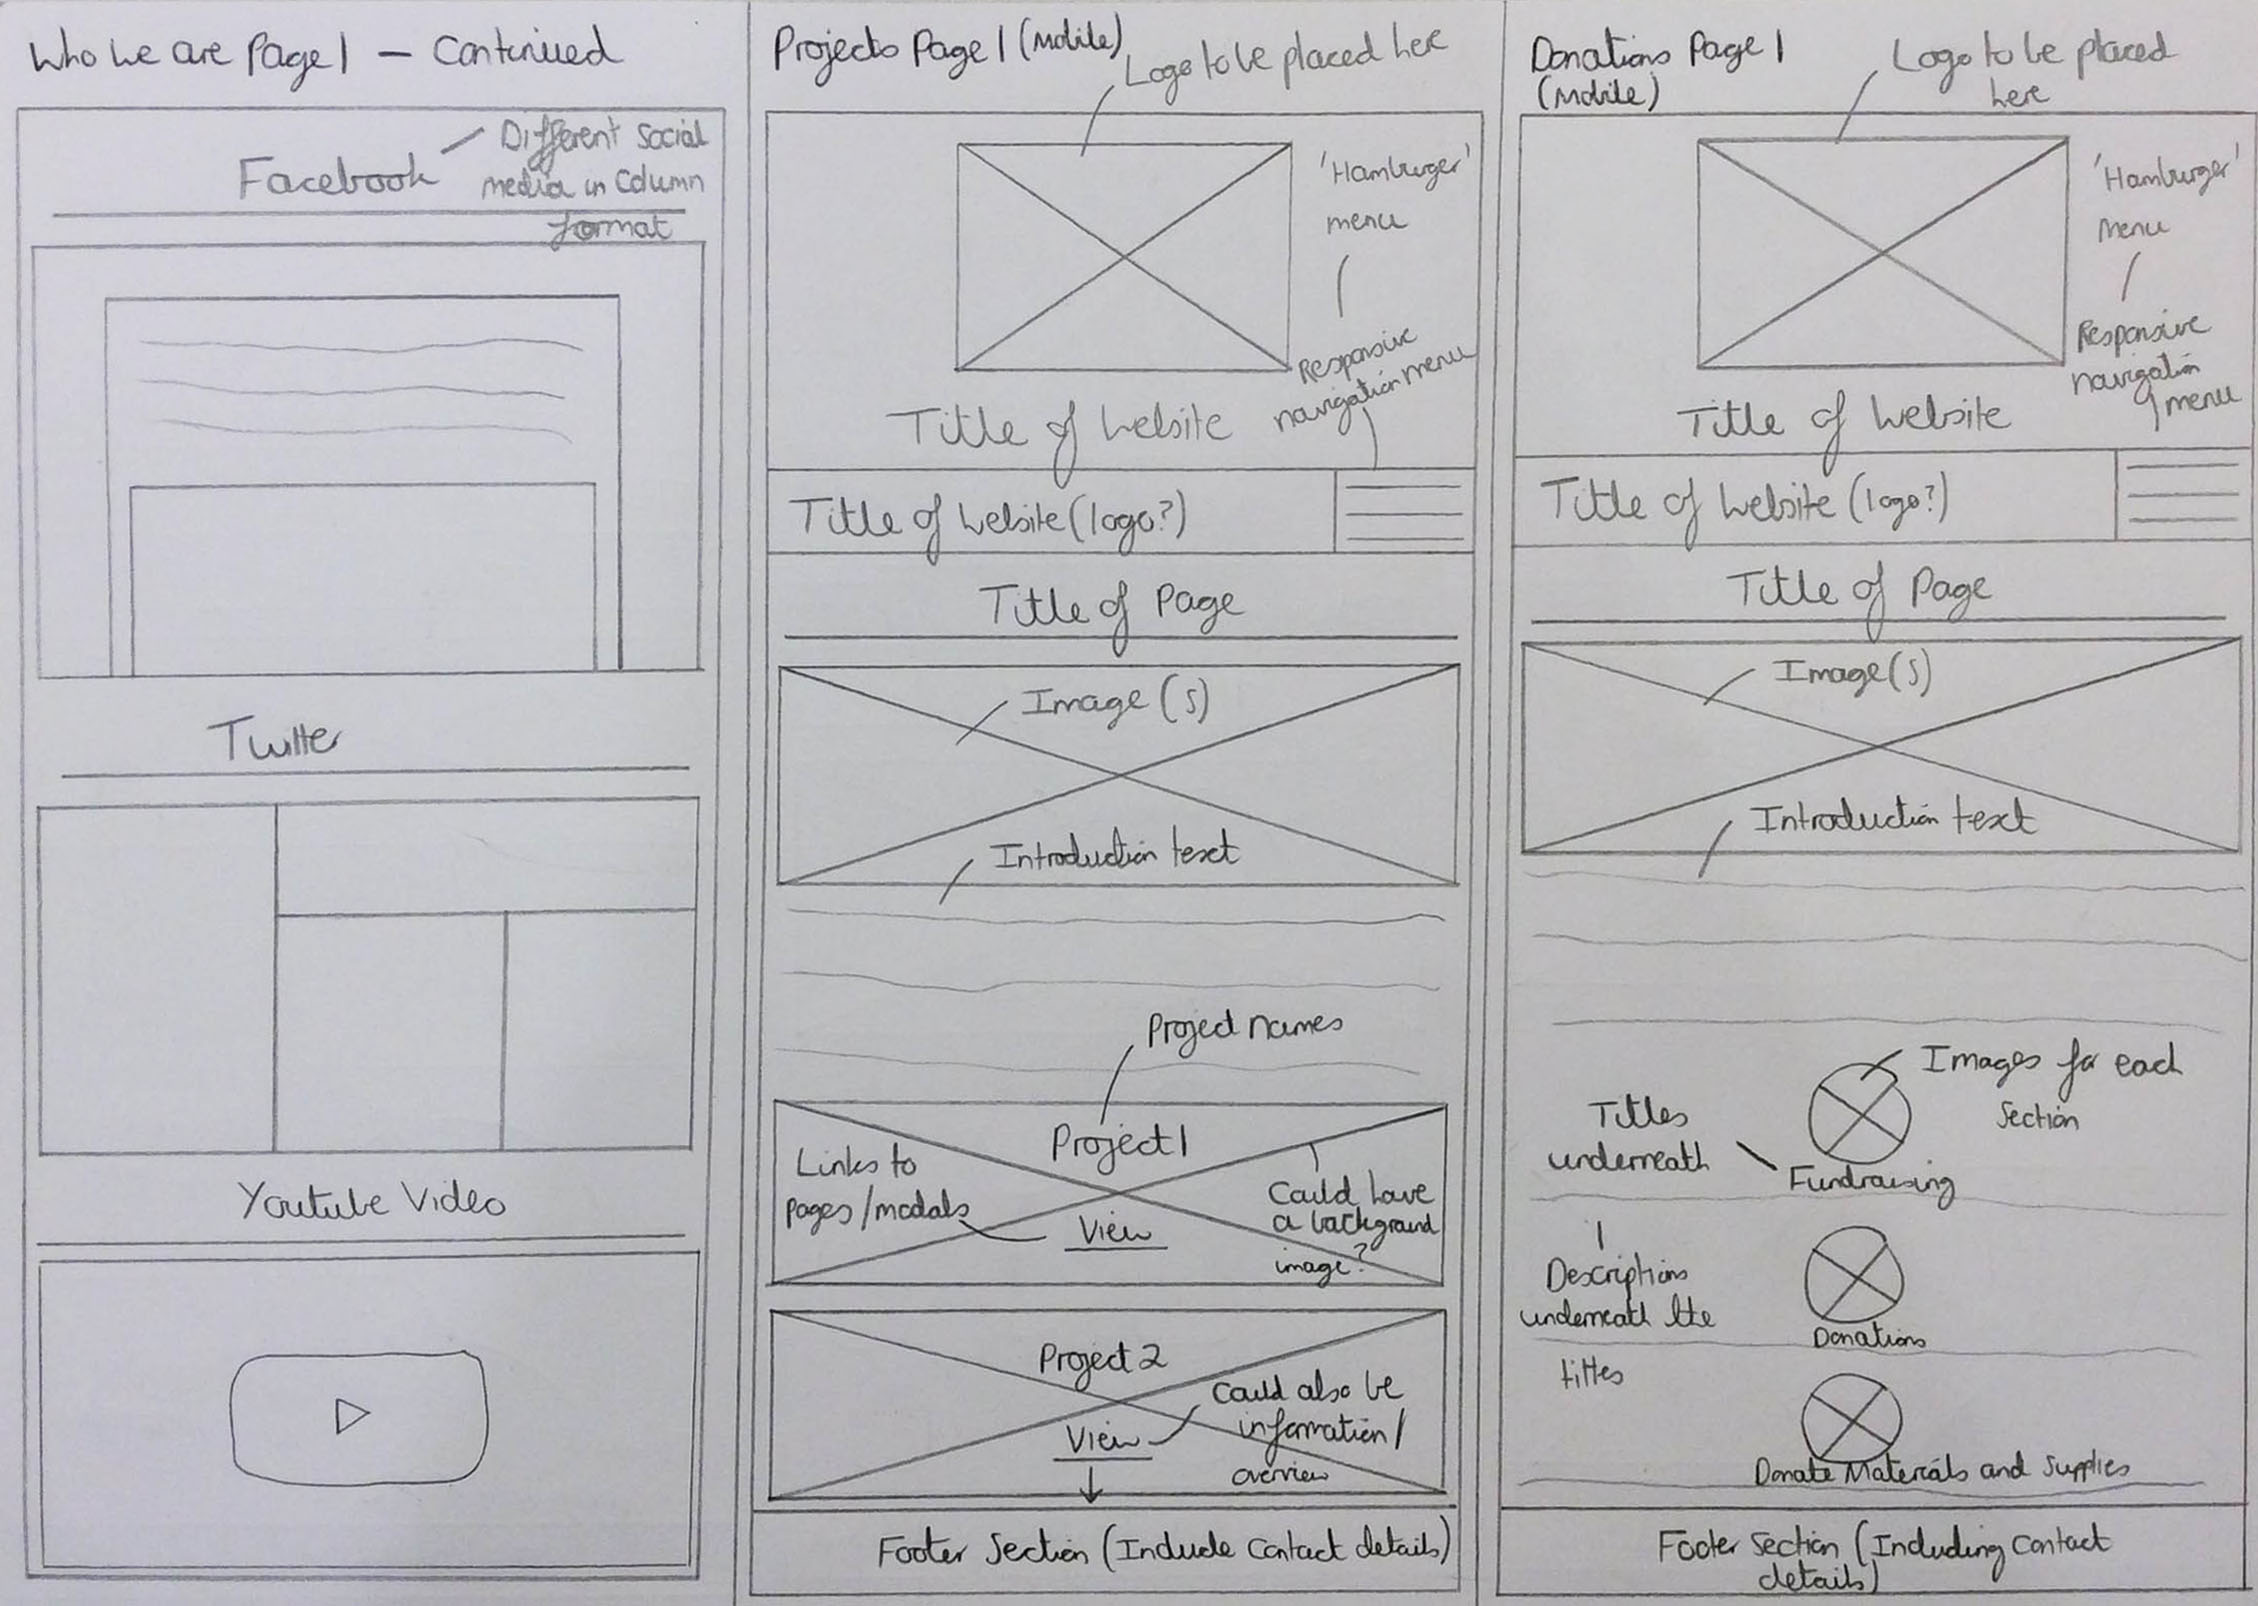 The Sketched 'Who We Are' (Part 2), Projects and Donations Pages Wireframes